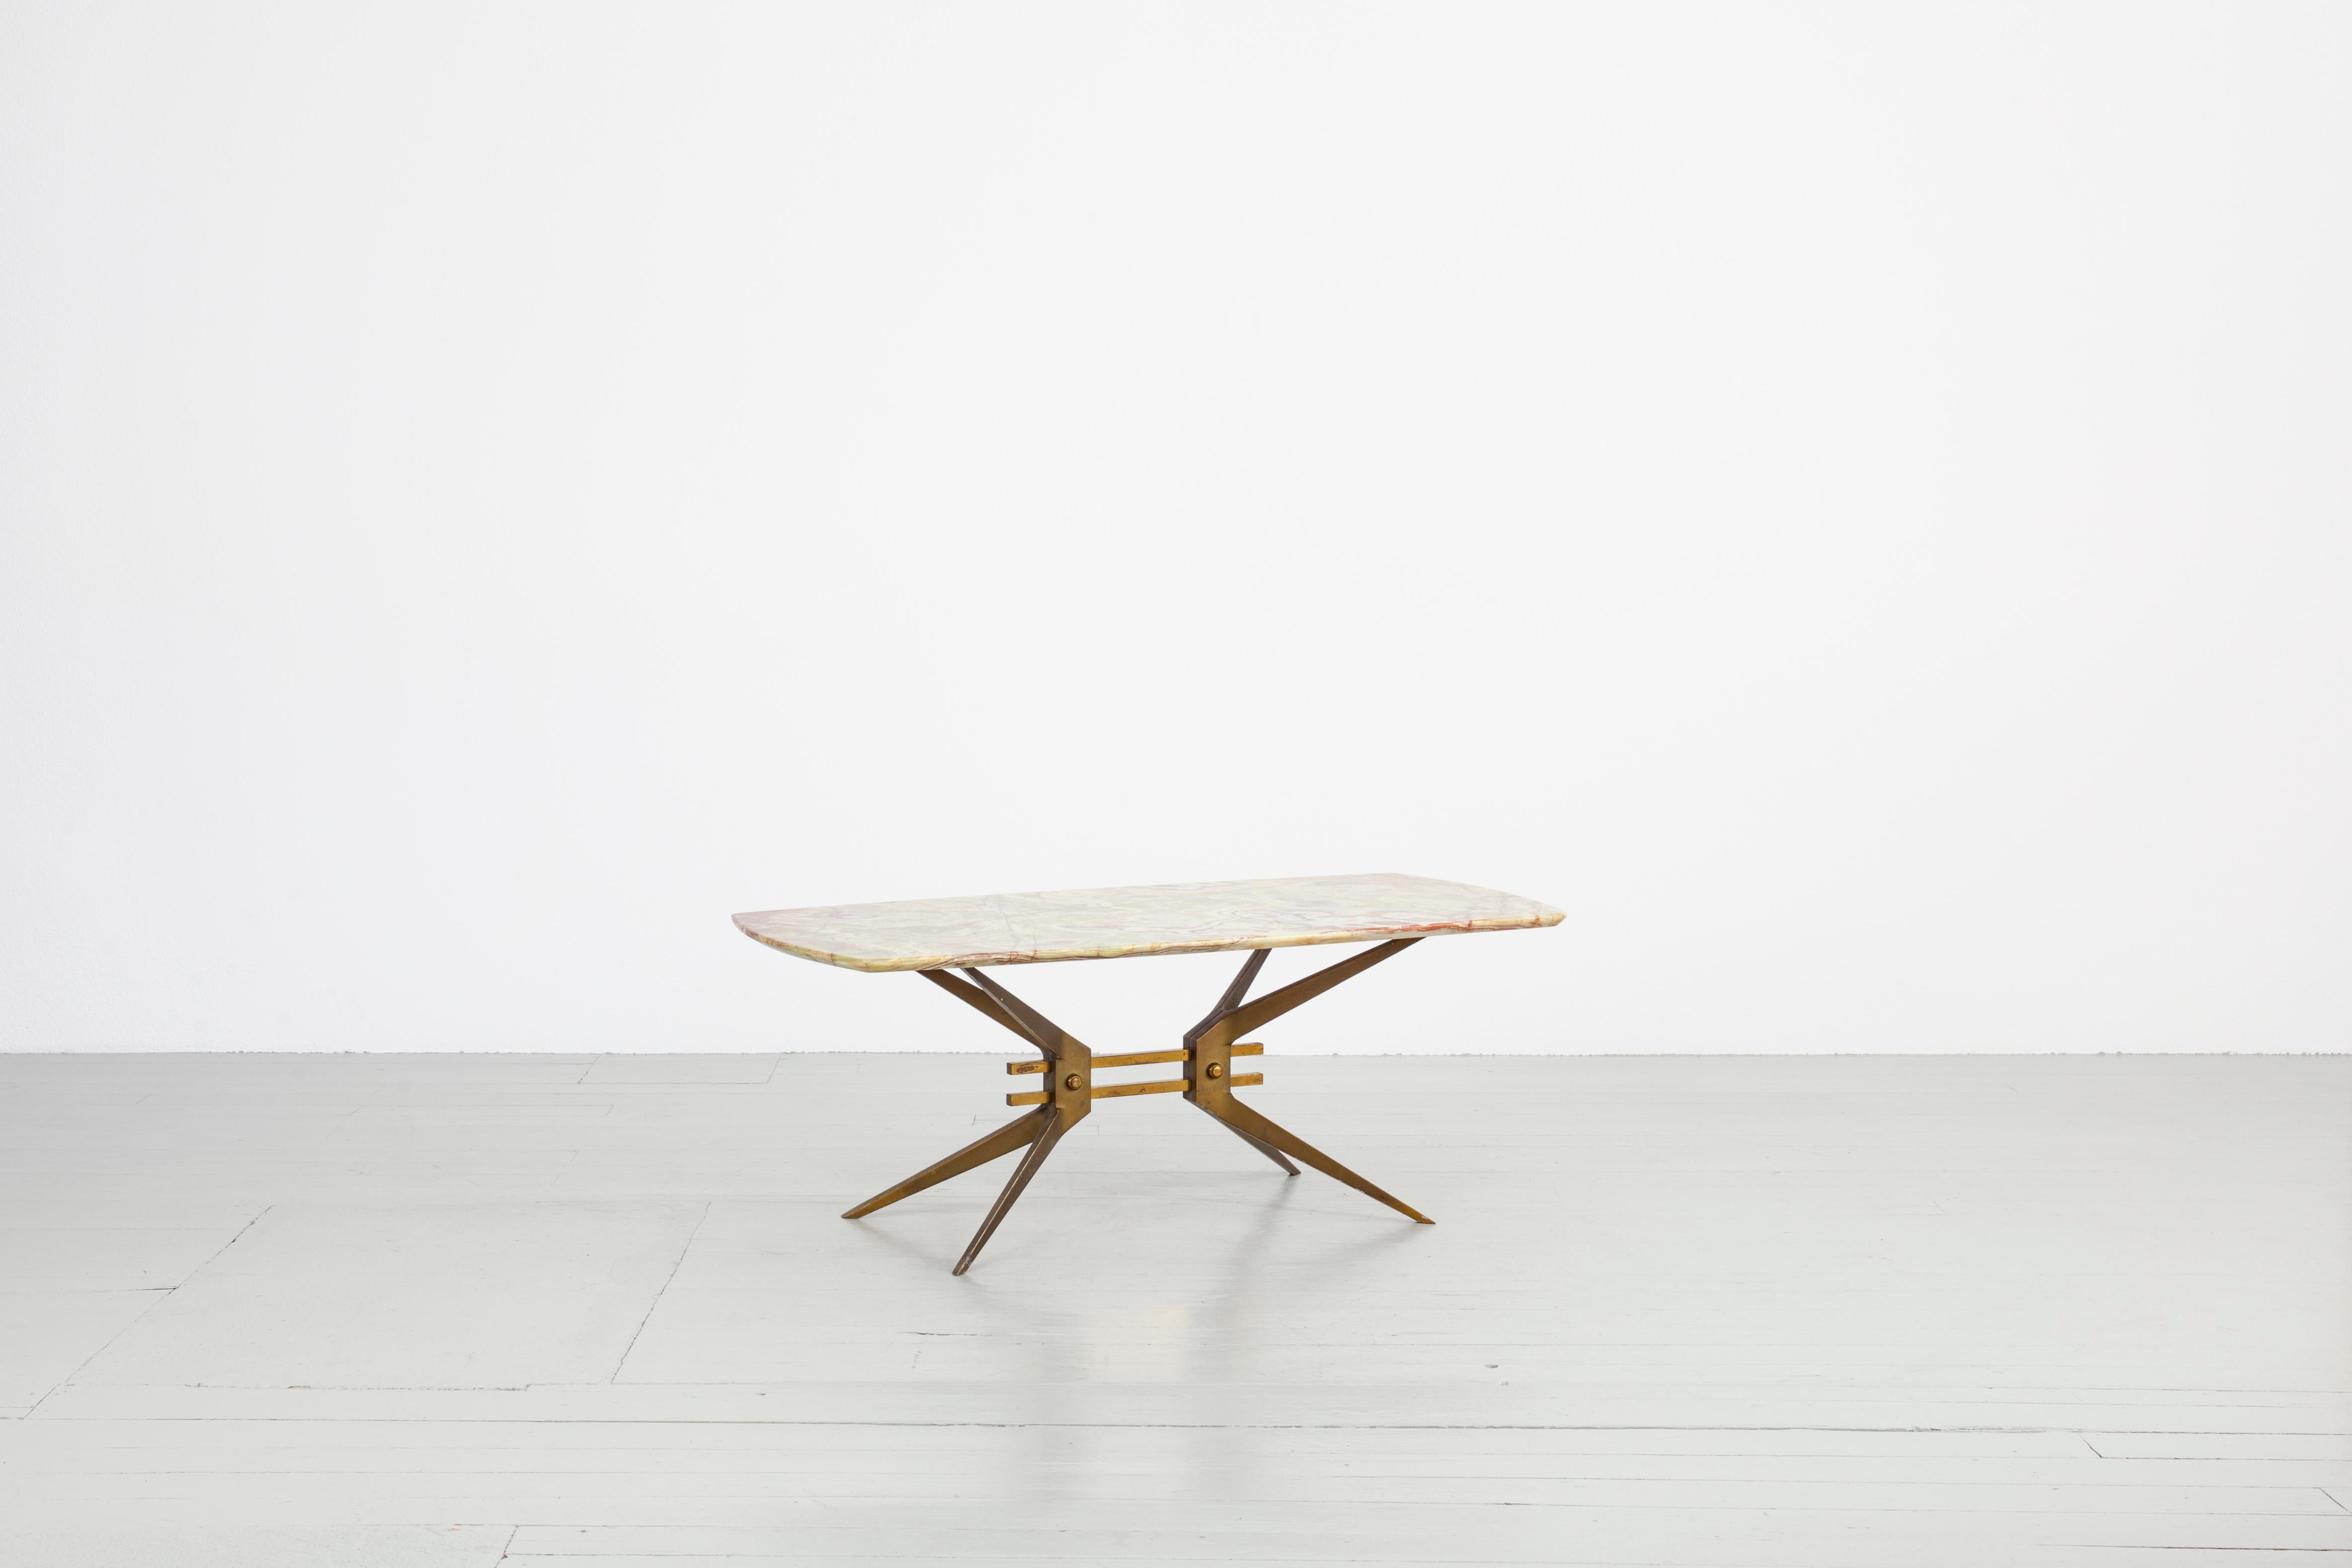 This robust coffee table was made in Italy in the 1960s. The striking table frame is a stable base for the heavy Onyx top. Two brass struts connect the tapered table legs to form an X-shaped frame. The possibility of disassembling the table makes